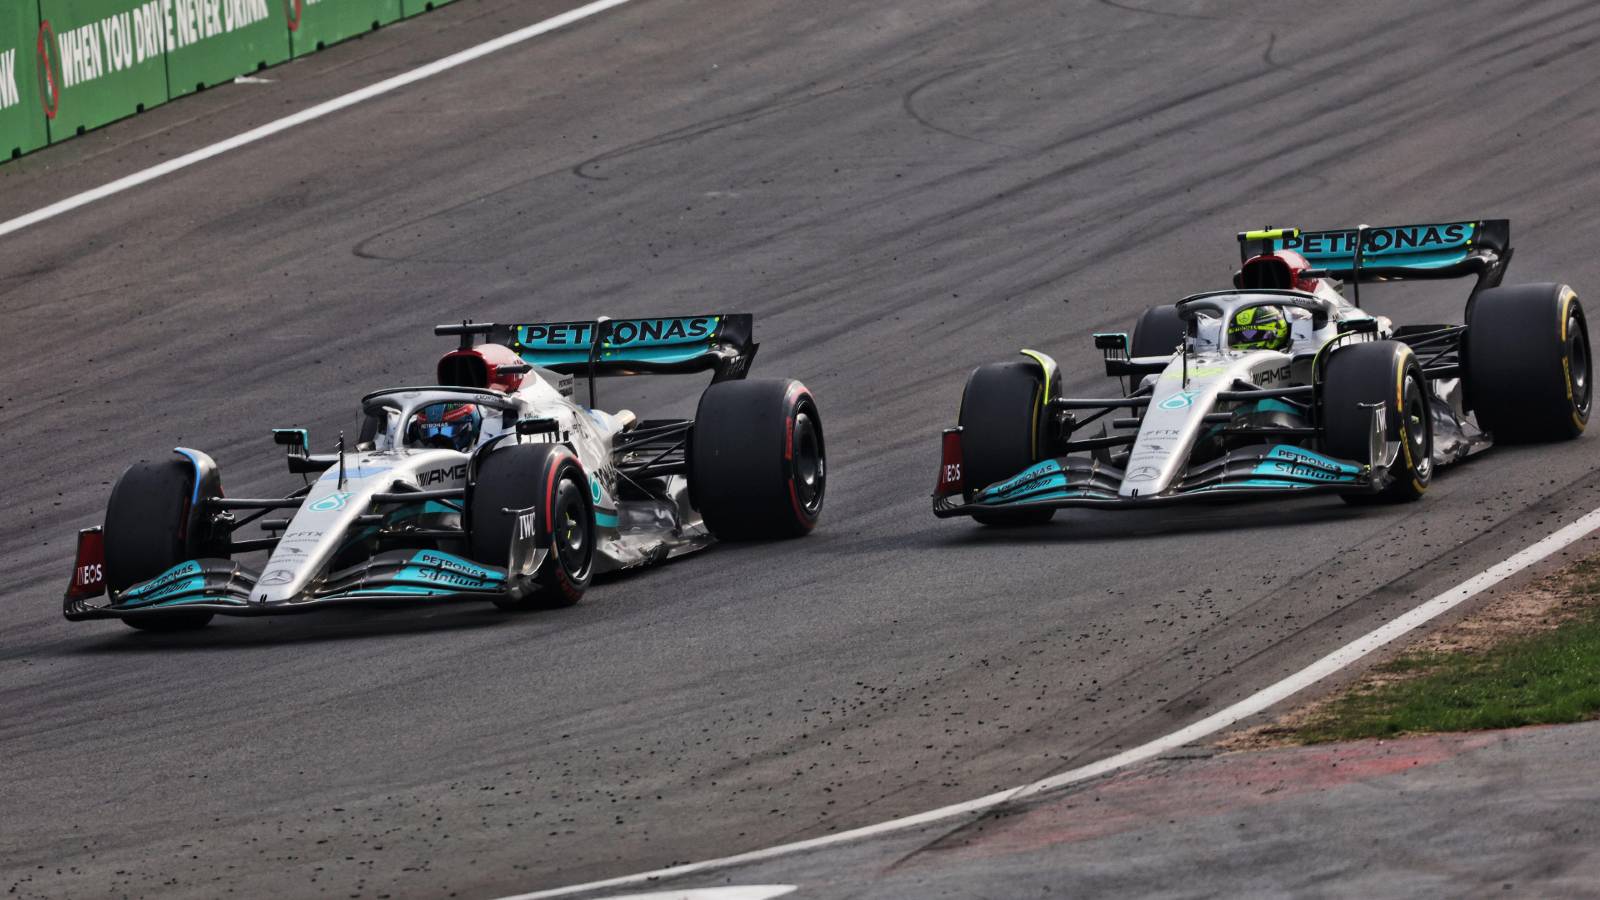 George Russell gets past Lewis Hamilton during the Dutch GP. Zandvoort September 2022.